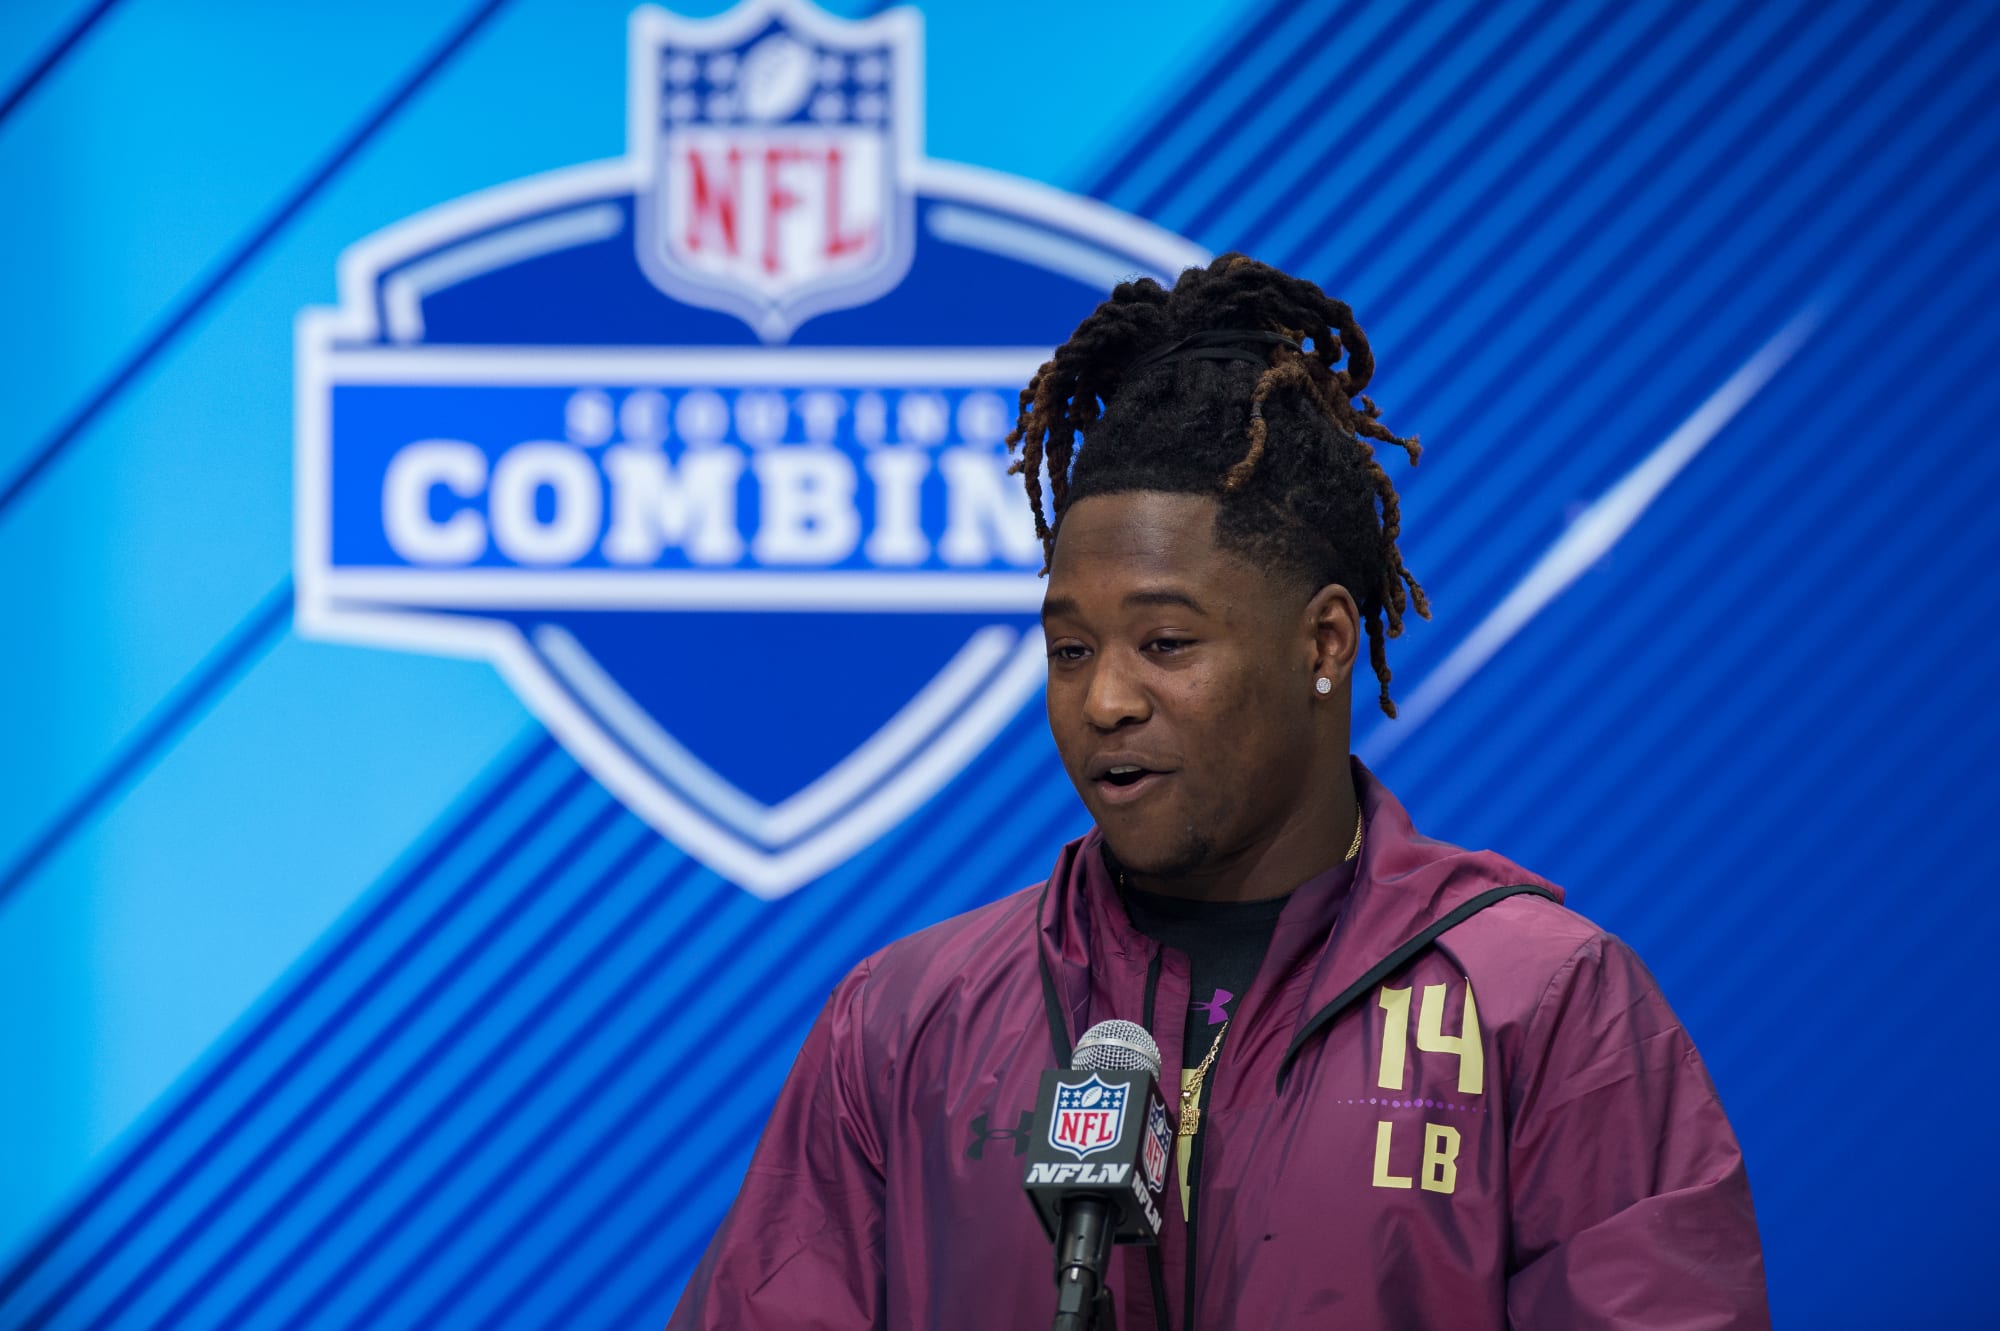 2018 NFL Scouting Combine: Day 3 schedule